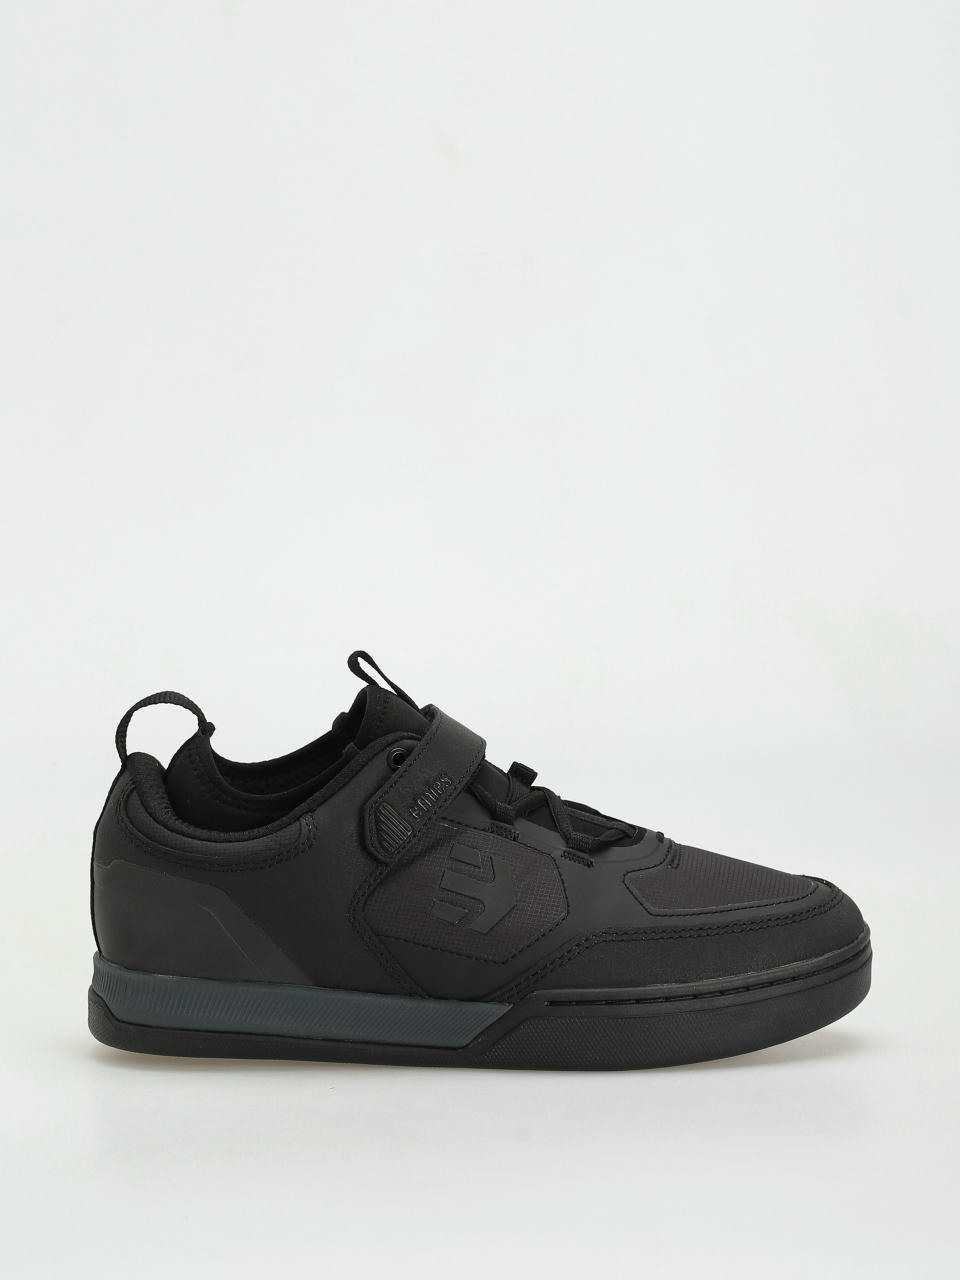 Topánky Etnies Camber Cl Wr (black)